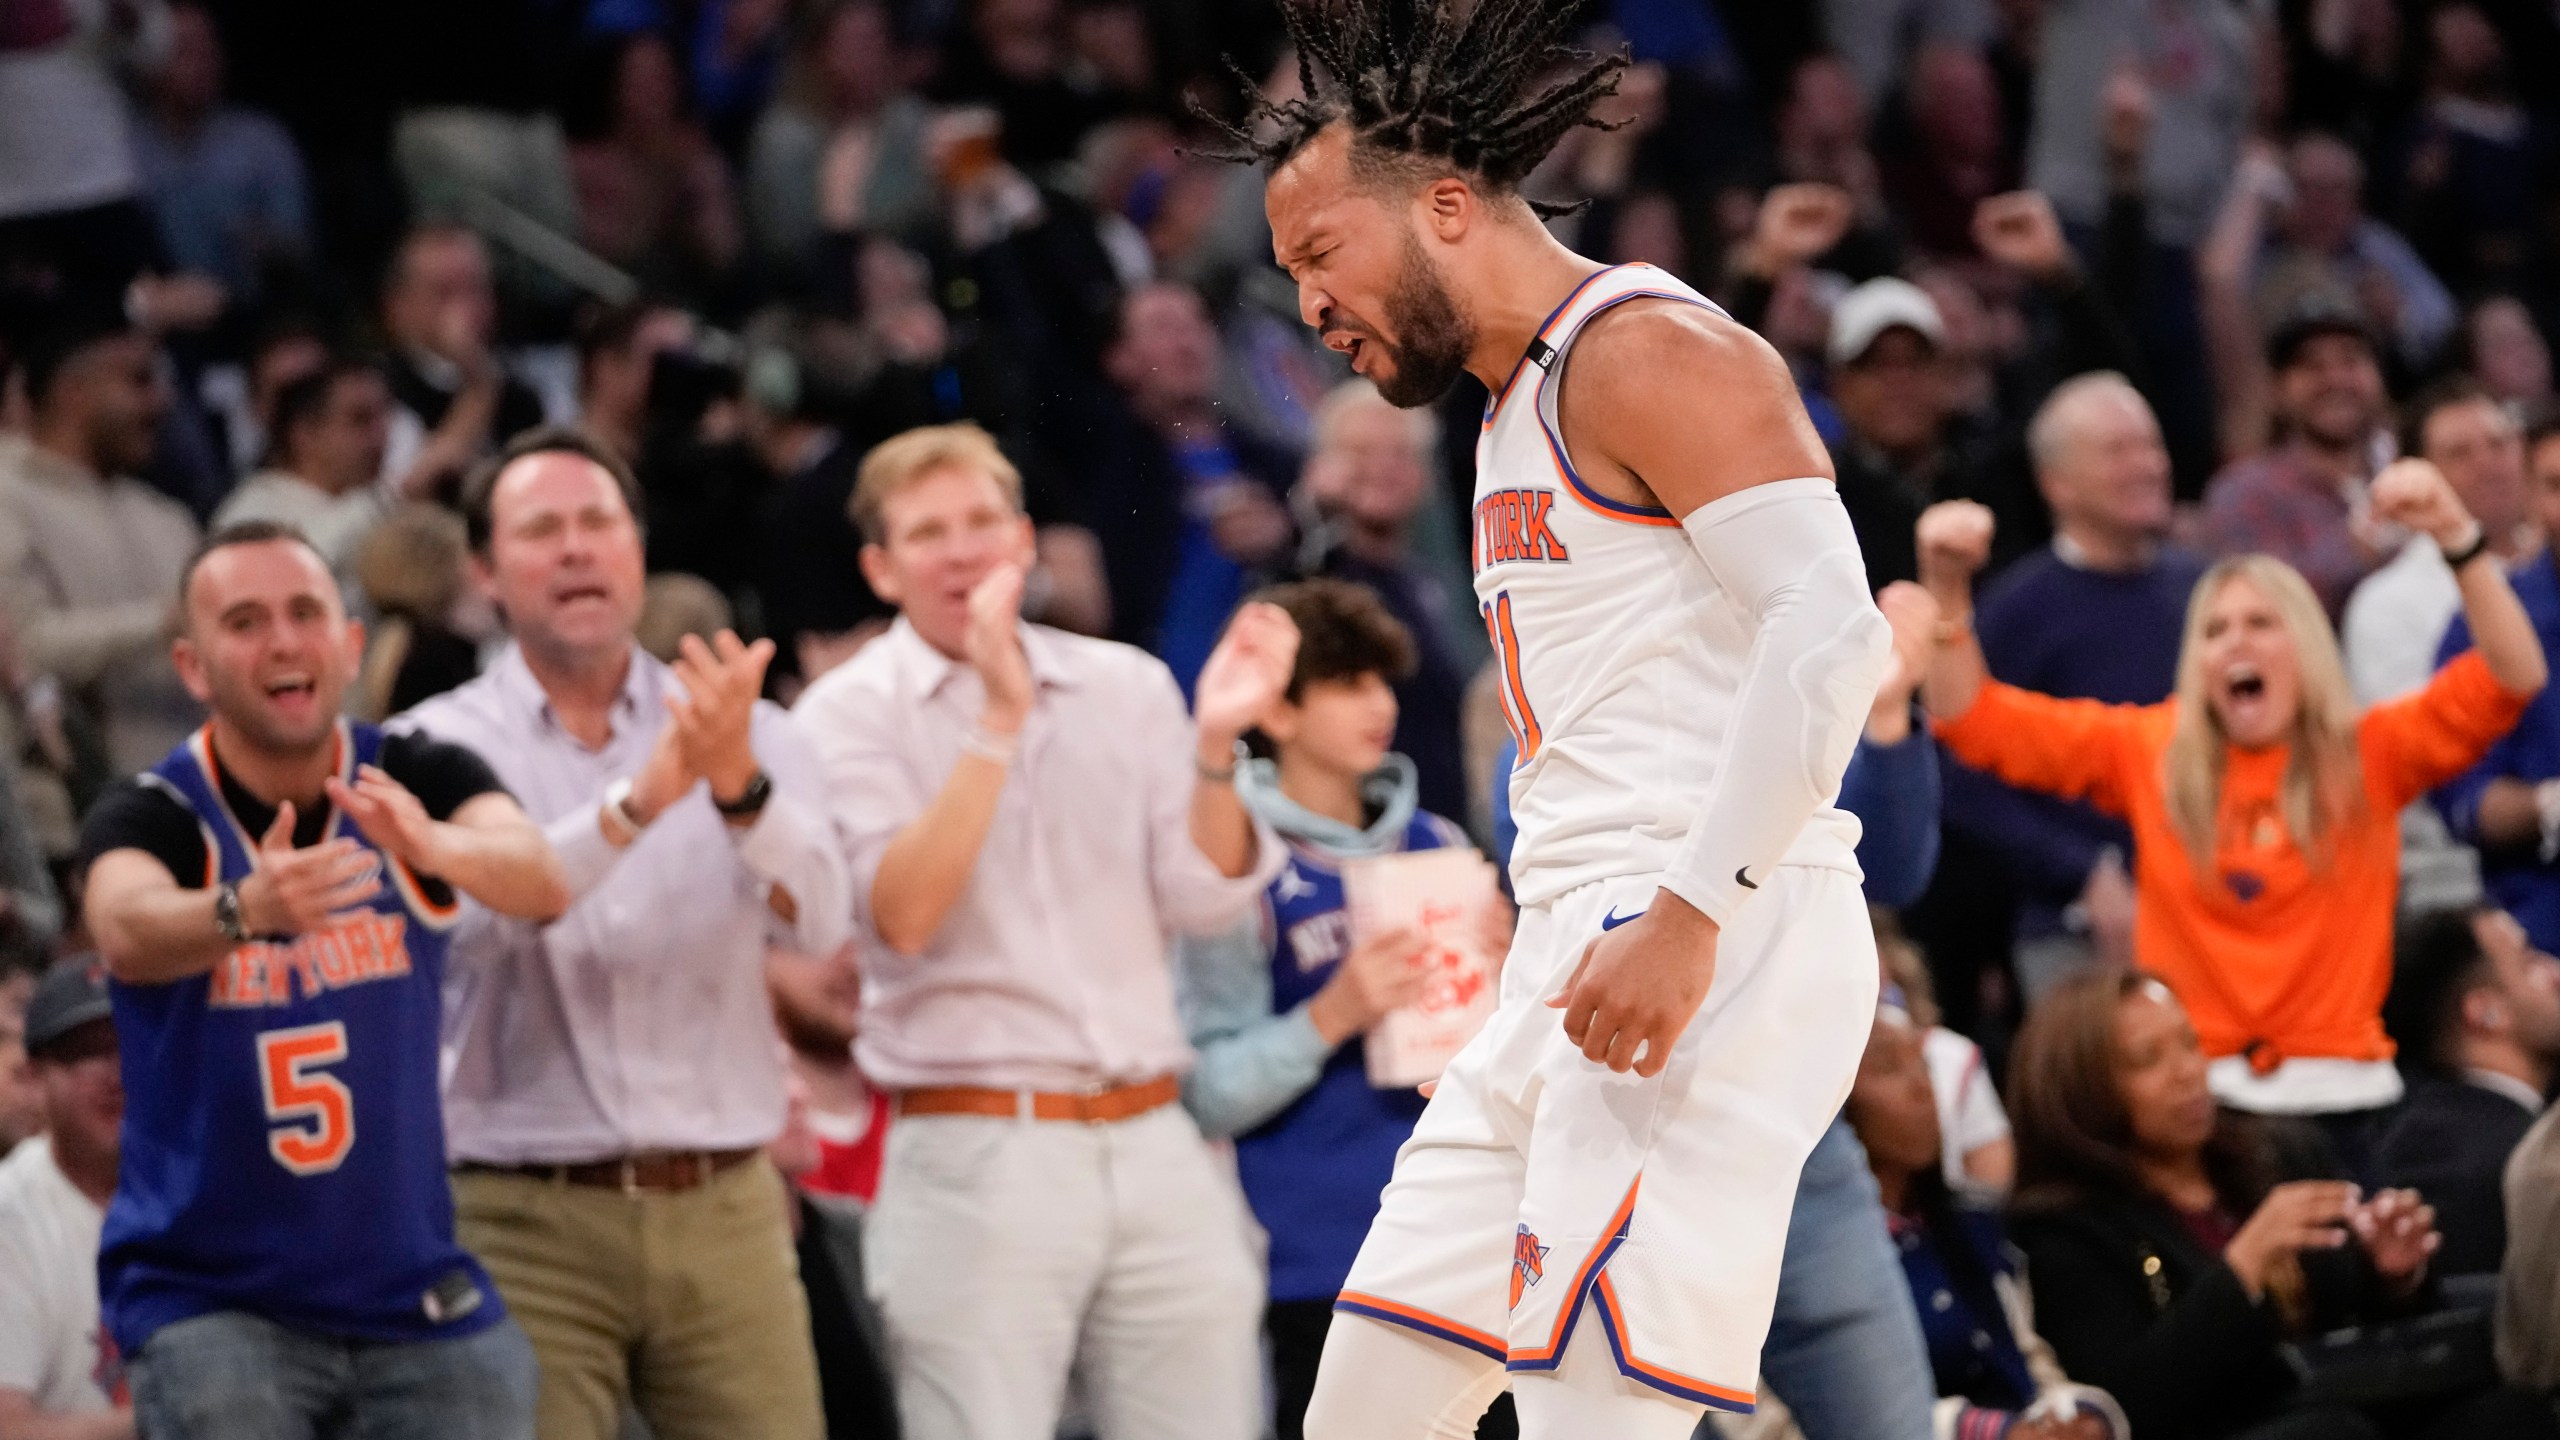 New York Knicks guard Jalen Brunson reacts after scoring a three-point basket in the first half of Game 4 in an NBA basketball first-round playoff series against the Cleveland Cavaliers, Sunday, April 23, 2023, at Madison Square Garden in New York. (AP Photo/Mary Altaffer)